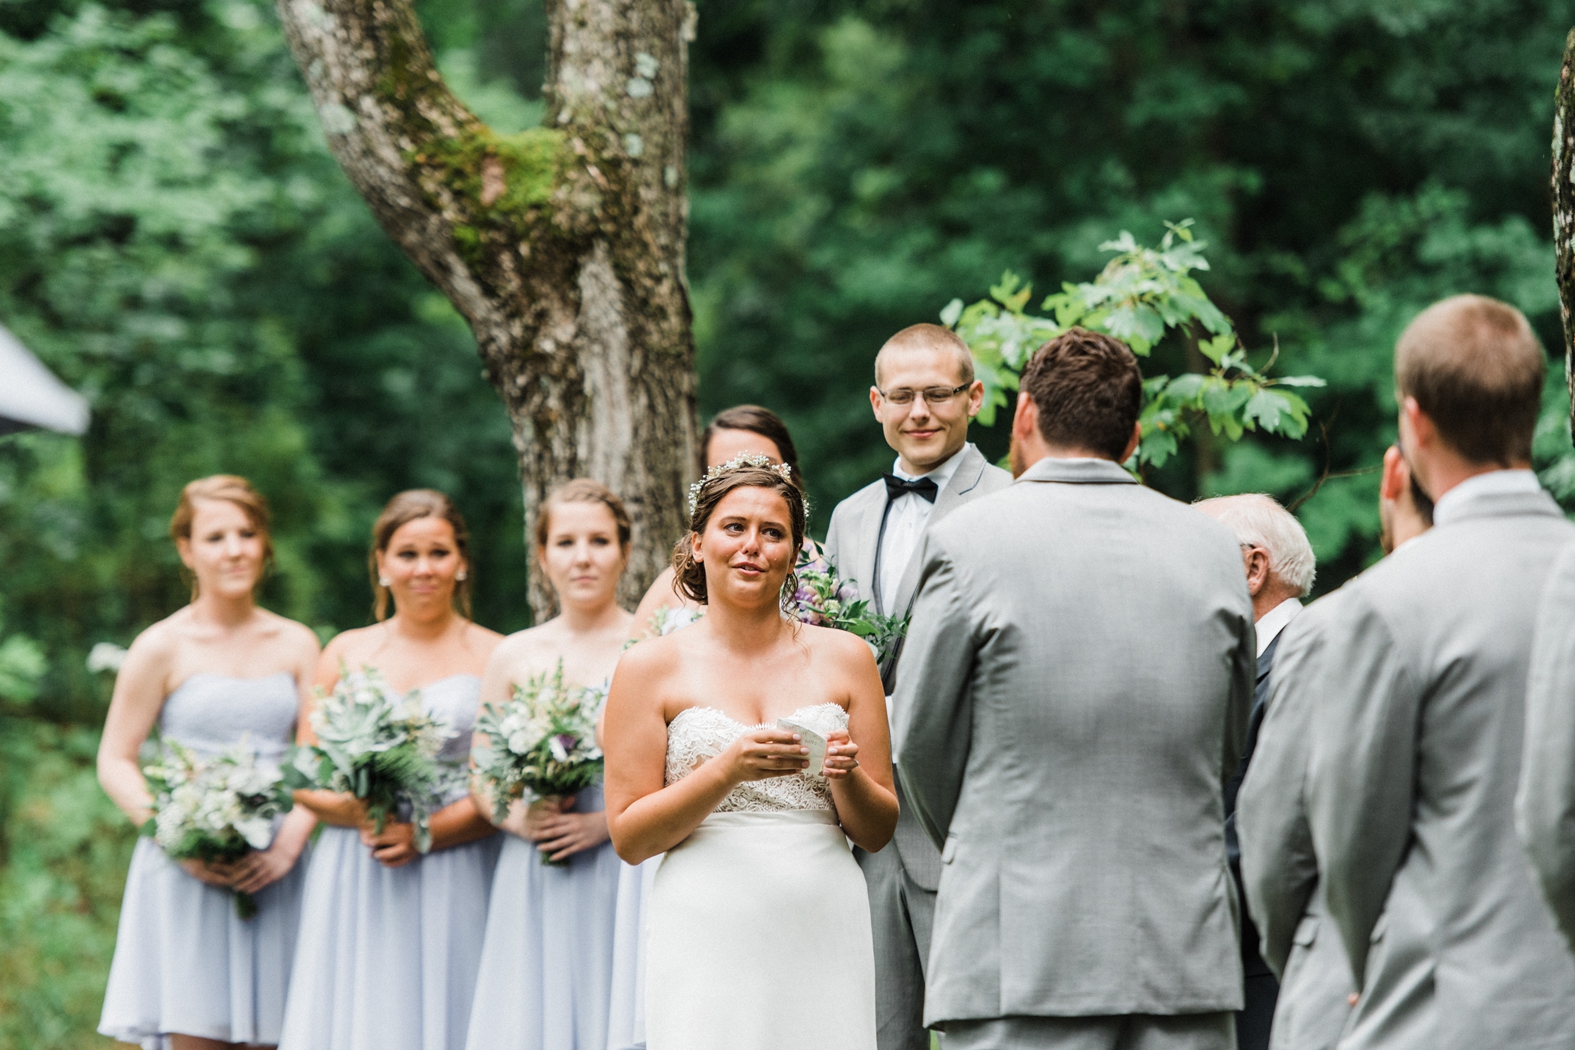 Outdoor wedding ceremony at Little Piney Lodge in Hermann MO, bride and groom reading vows